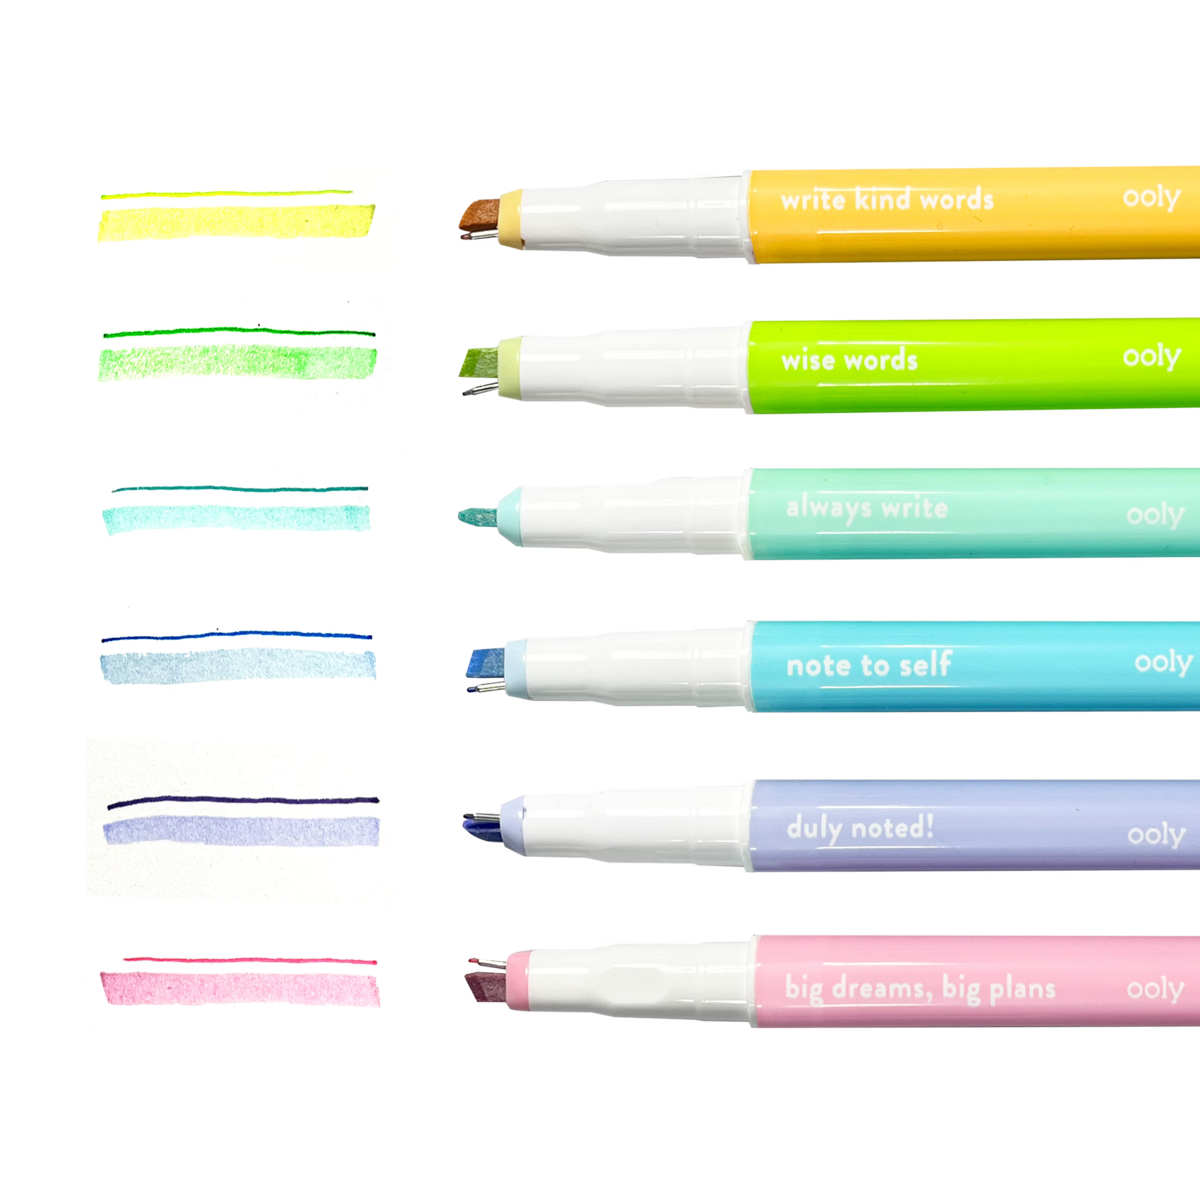 Noted! 2-in-1 Micro Fine Tip Pen and Highlighters - Set of 6